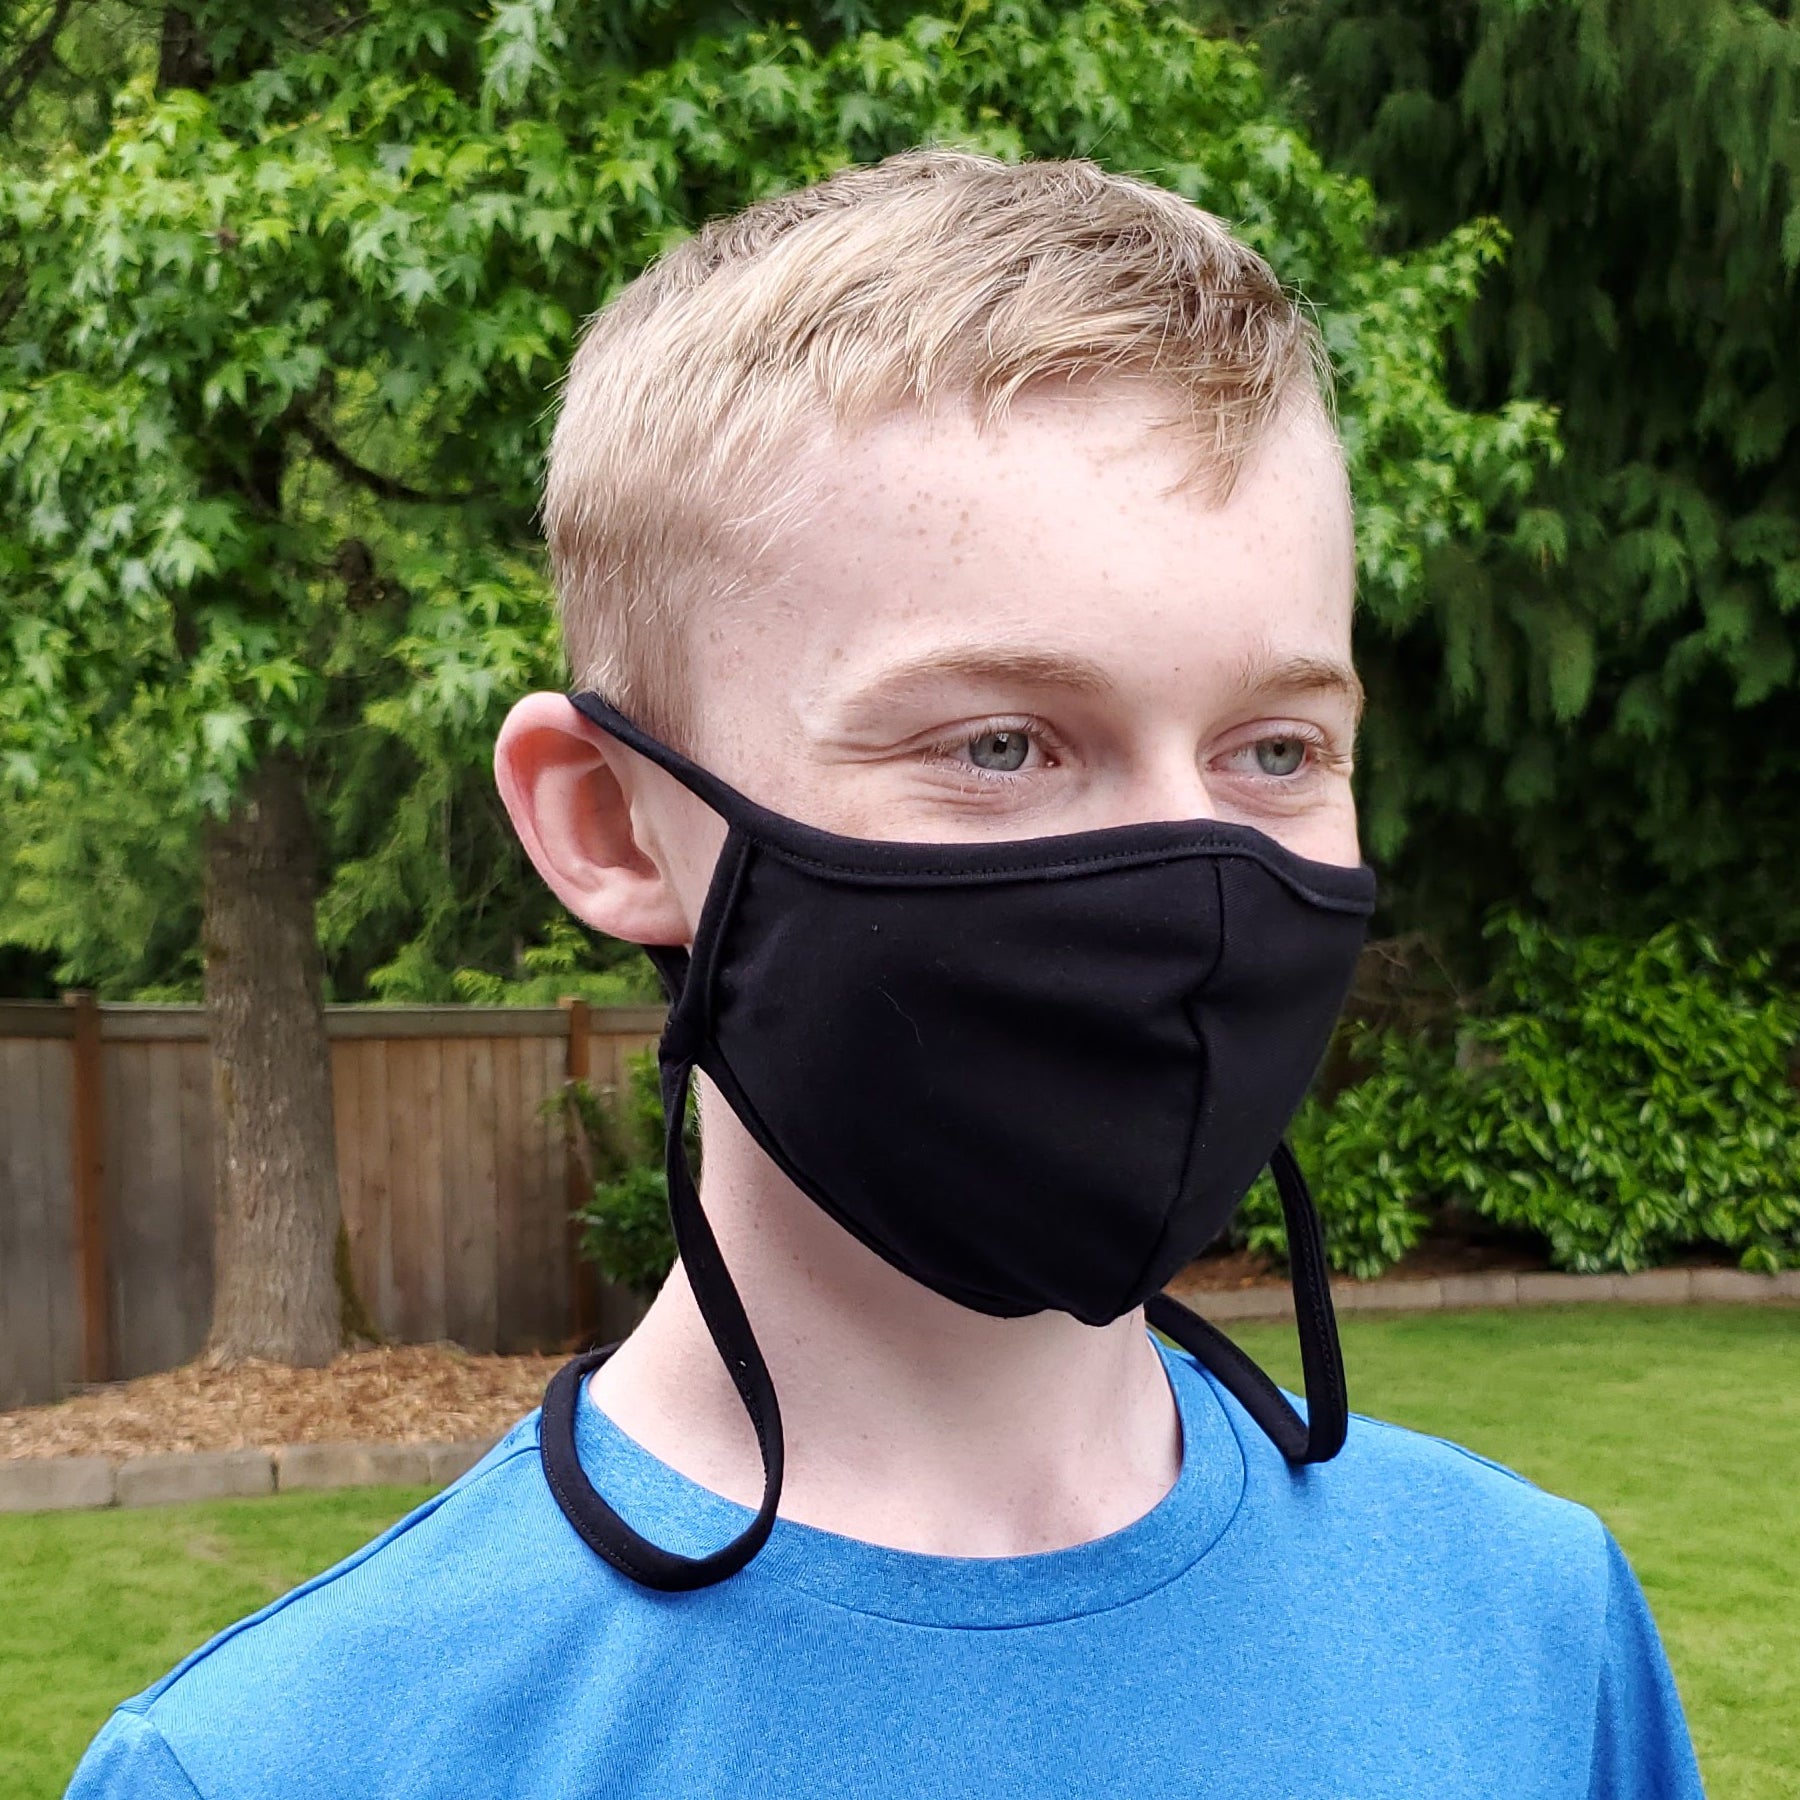 Buttonsmith Black Cotton Adjustable Face Mask - Made in the USA